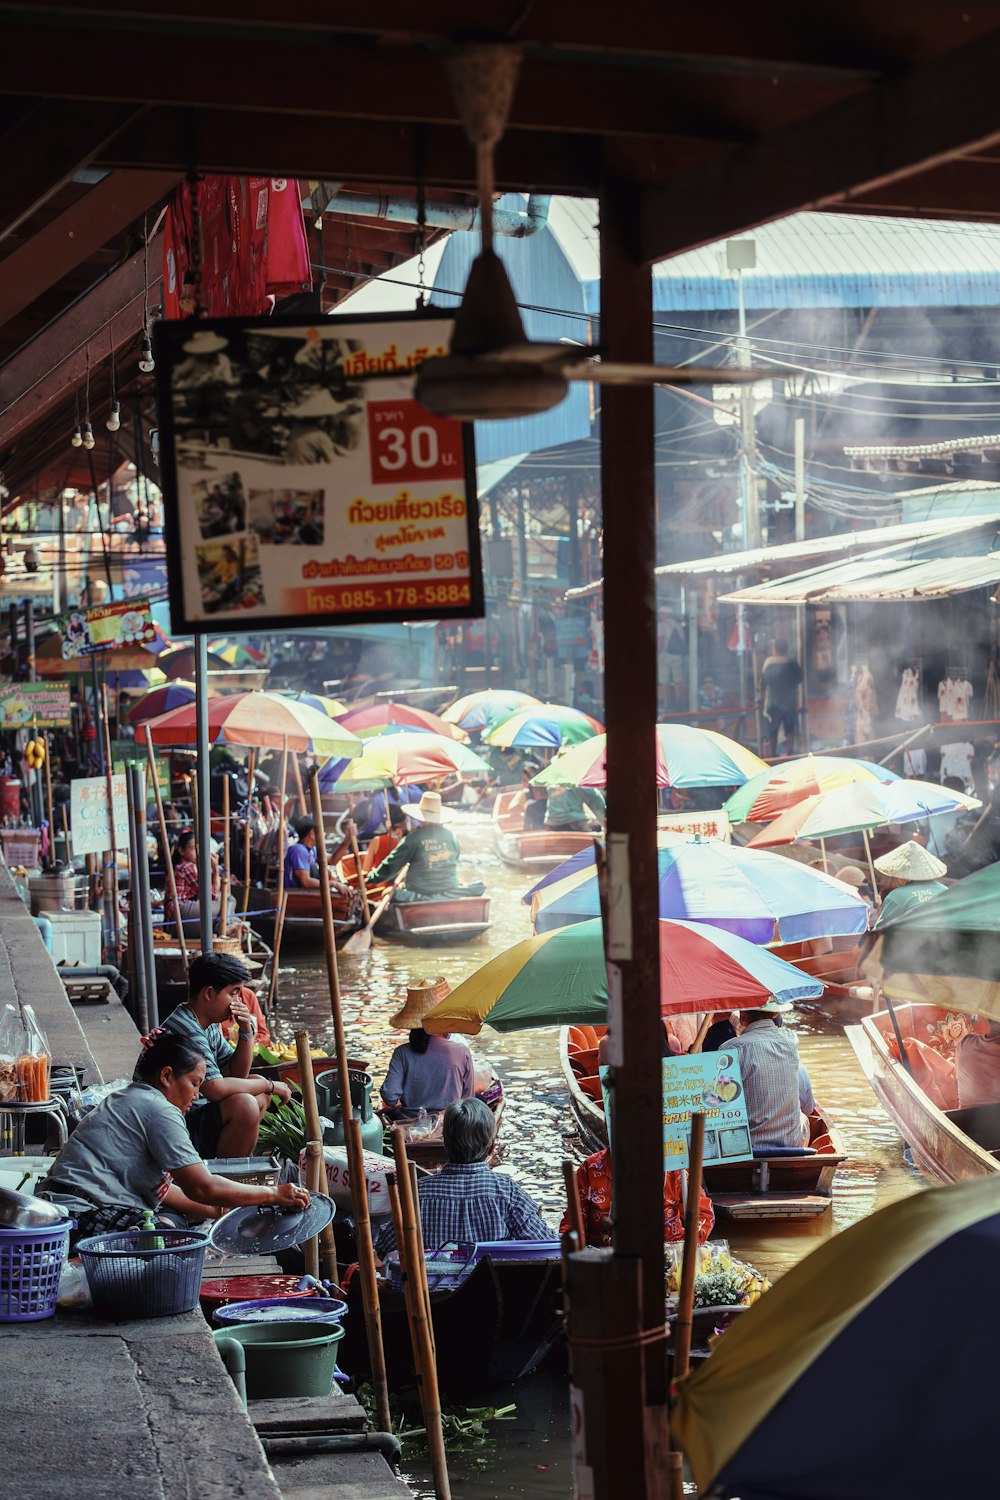 a group of people sitting under umbrellas in a market